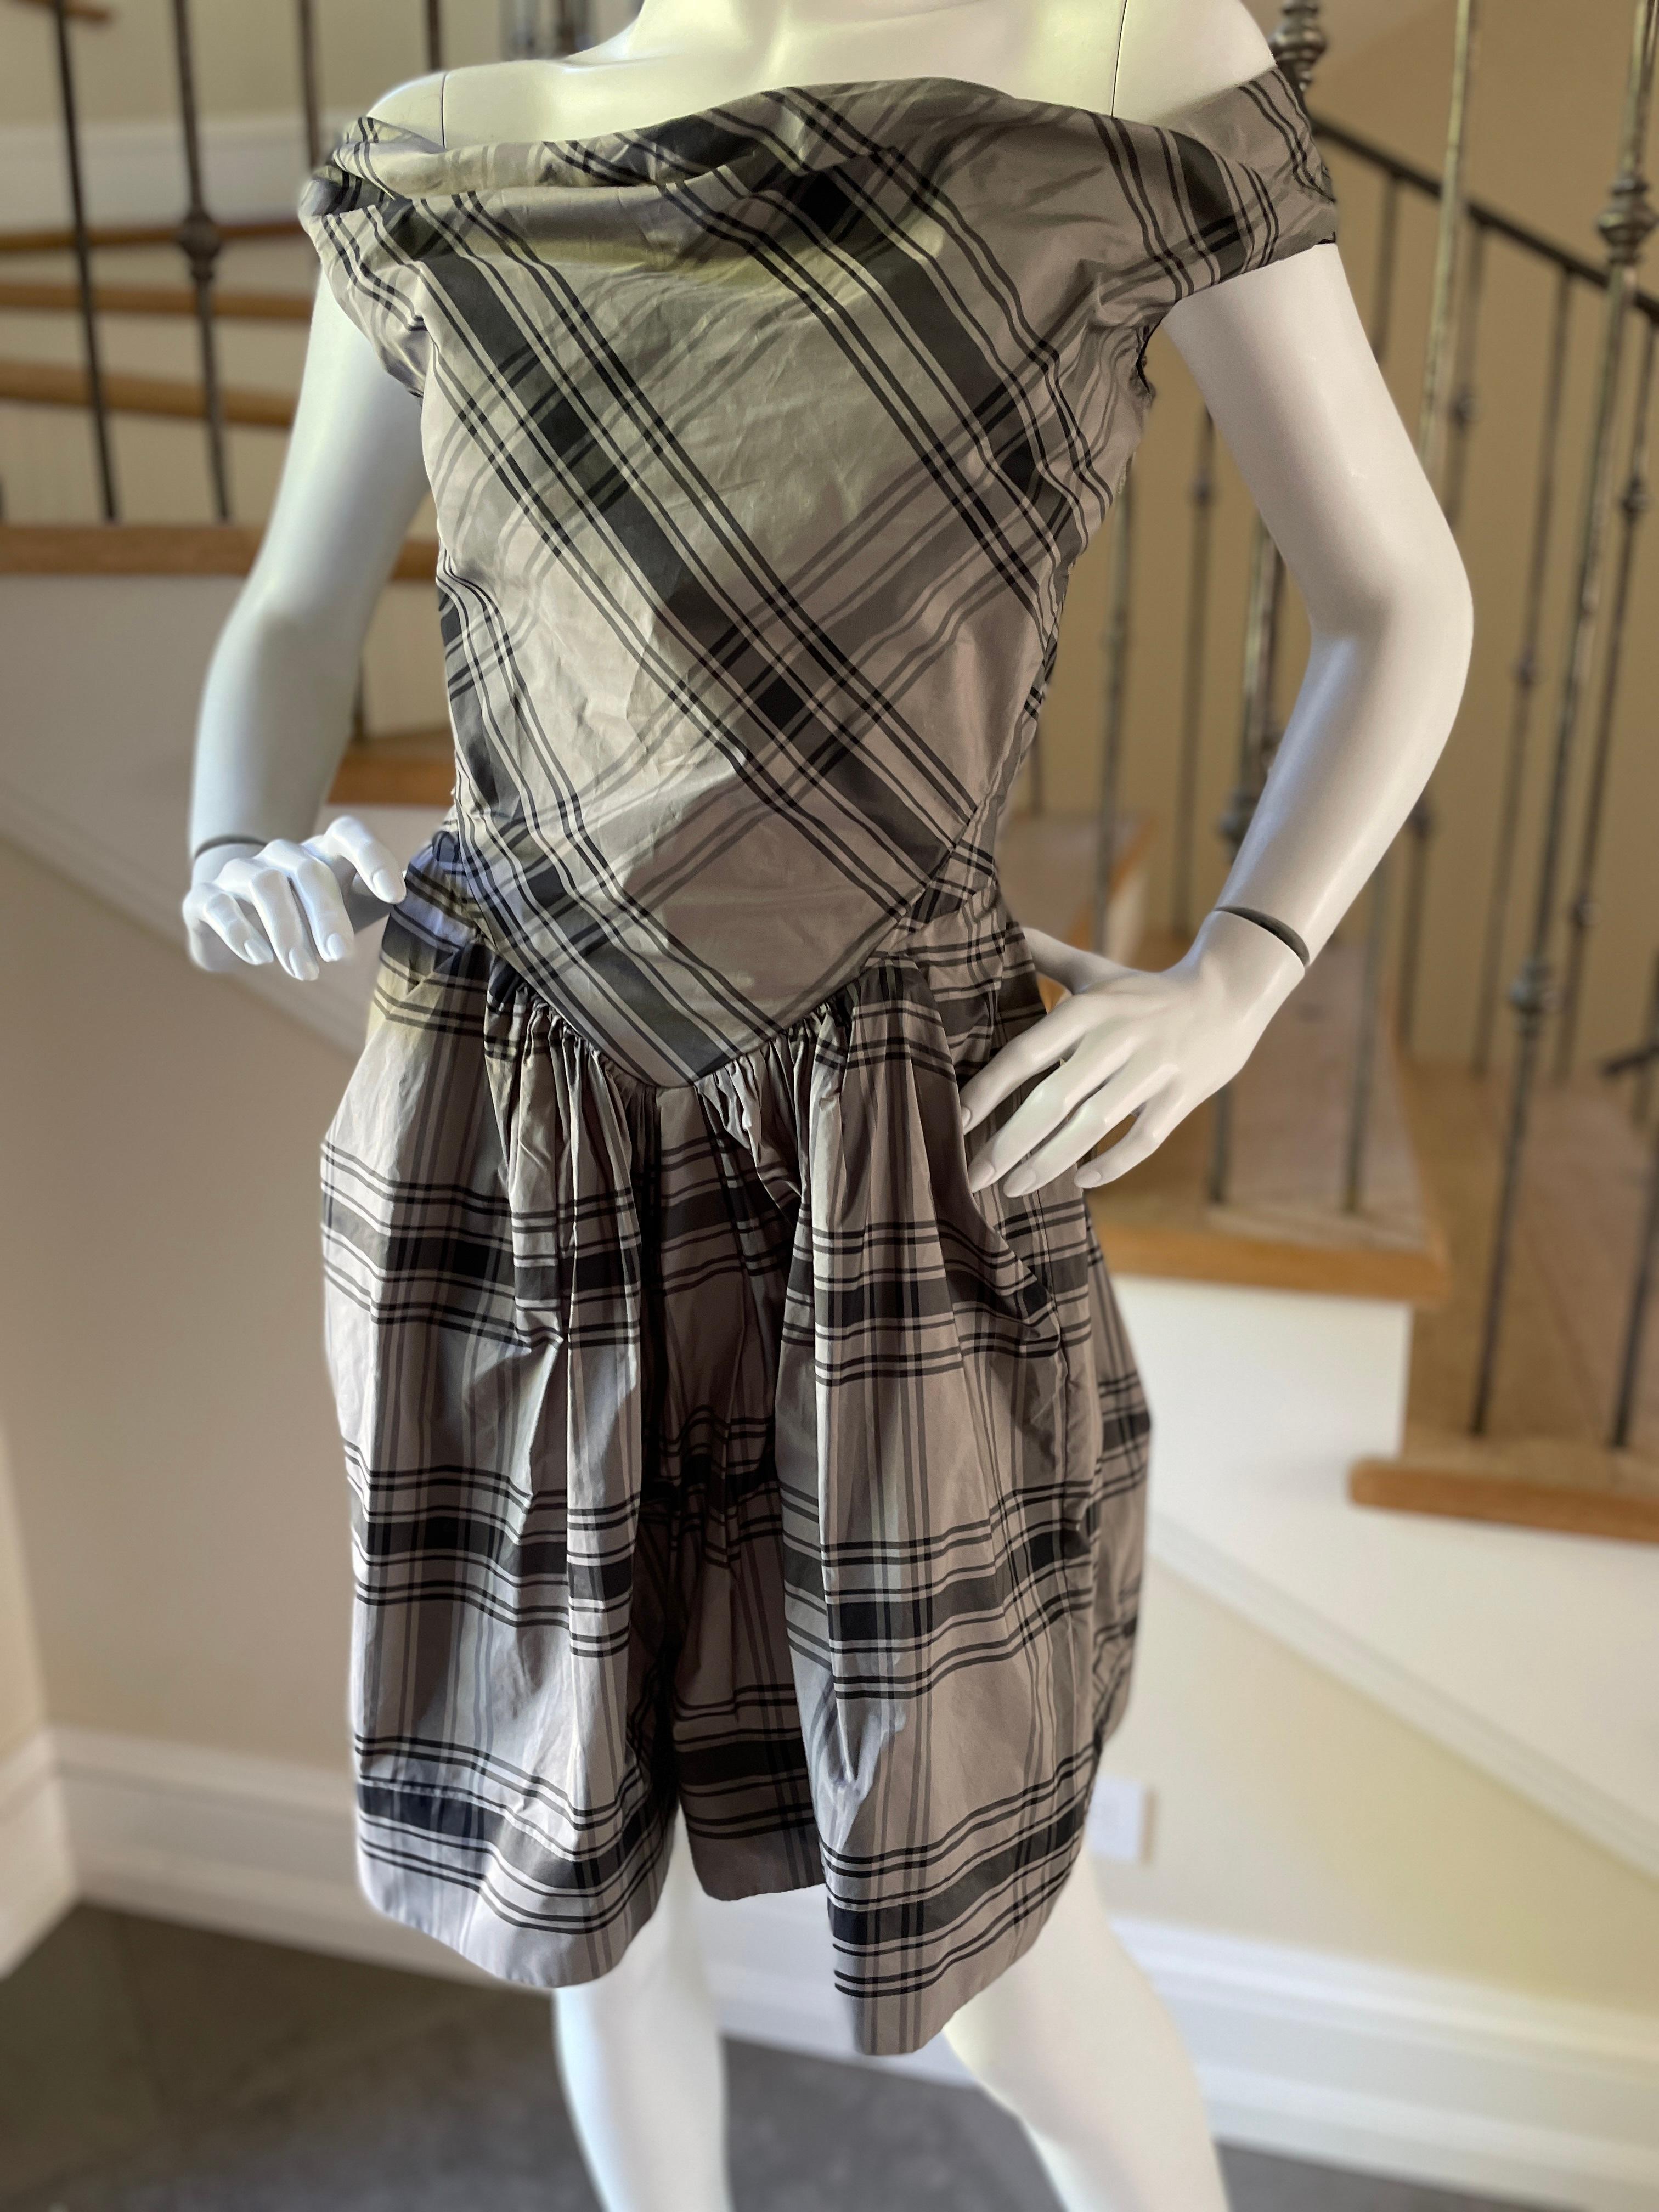 Vivienne Westwood Plaid Taffeta Day Dress for Anglomania.
This is so charming, with a button down front and a wide skirt that is pleated at the waist.
There are pockets.
 Size 42 UK
Bust 36